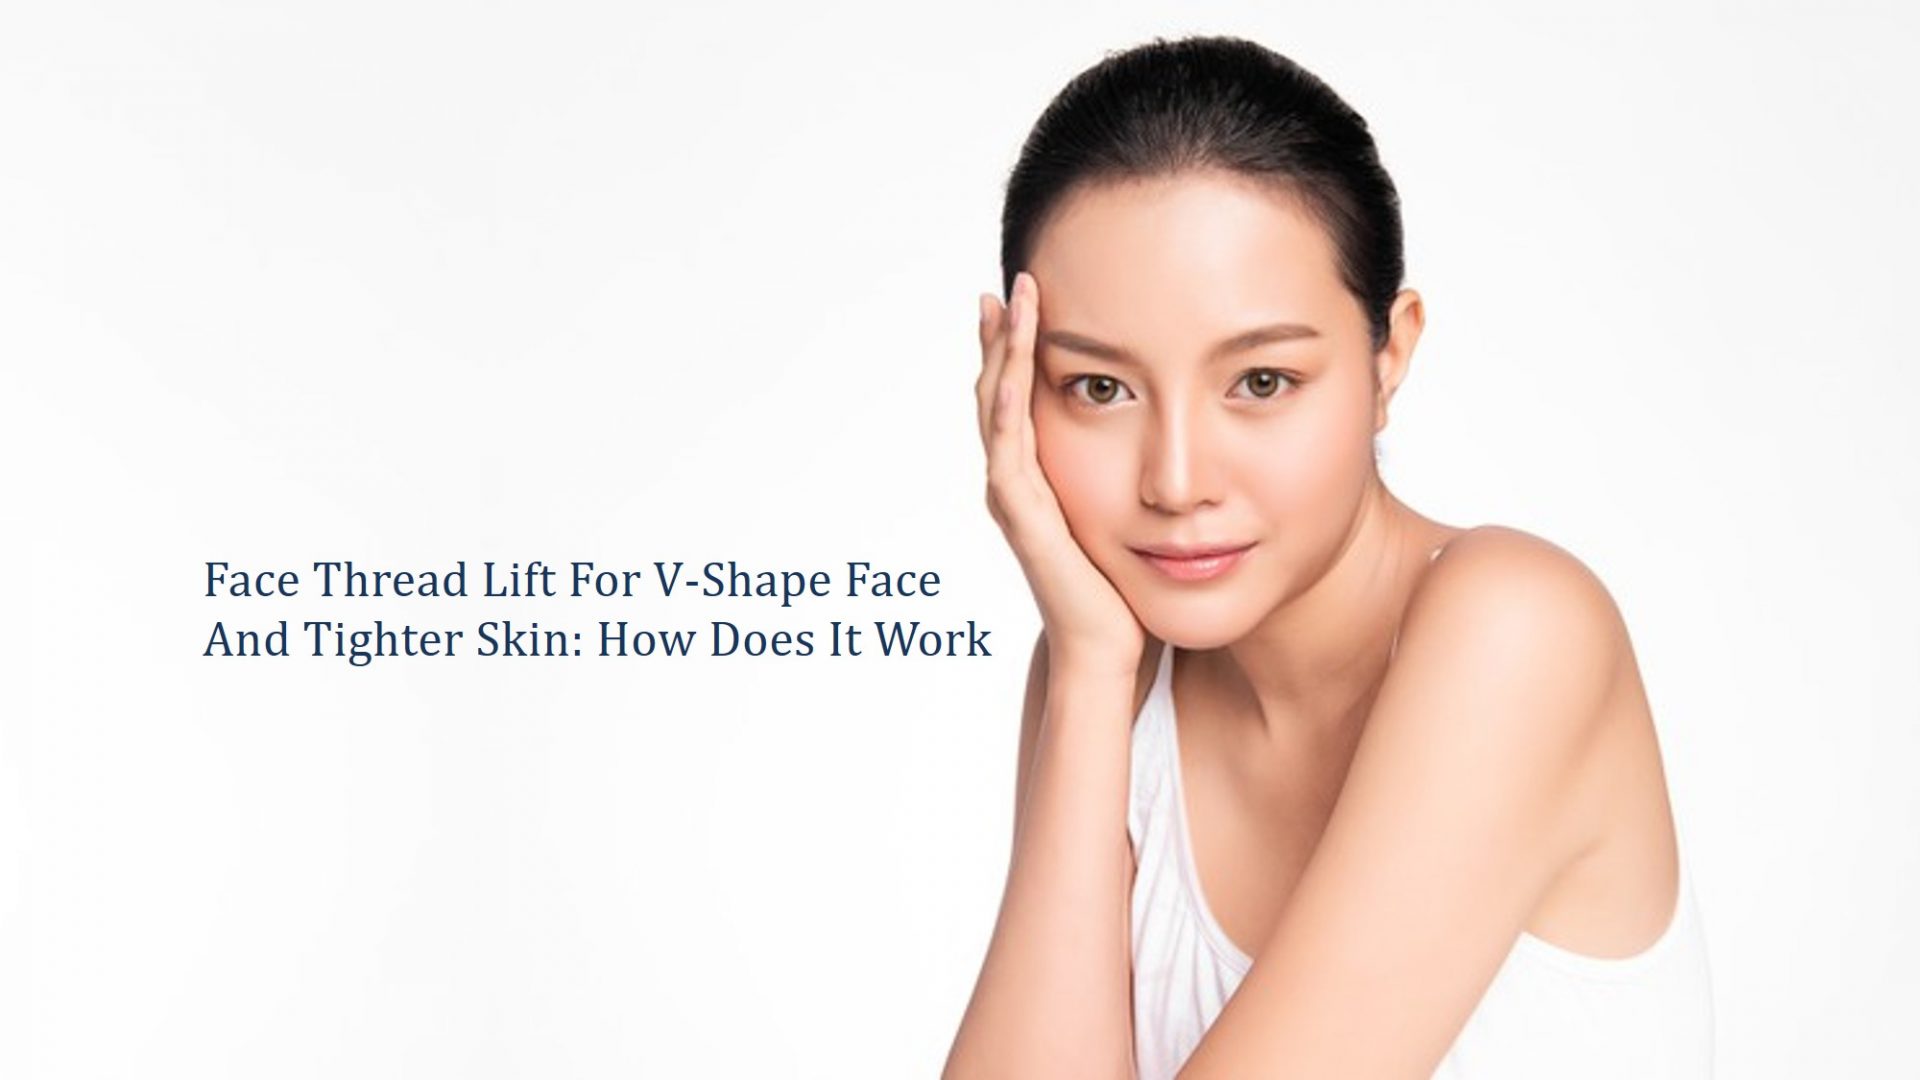 Face Thread Lift For V-Shape Face And Tighter Skin: How Does It Work?